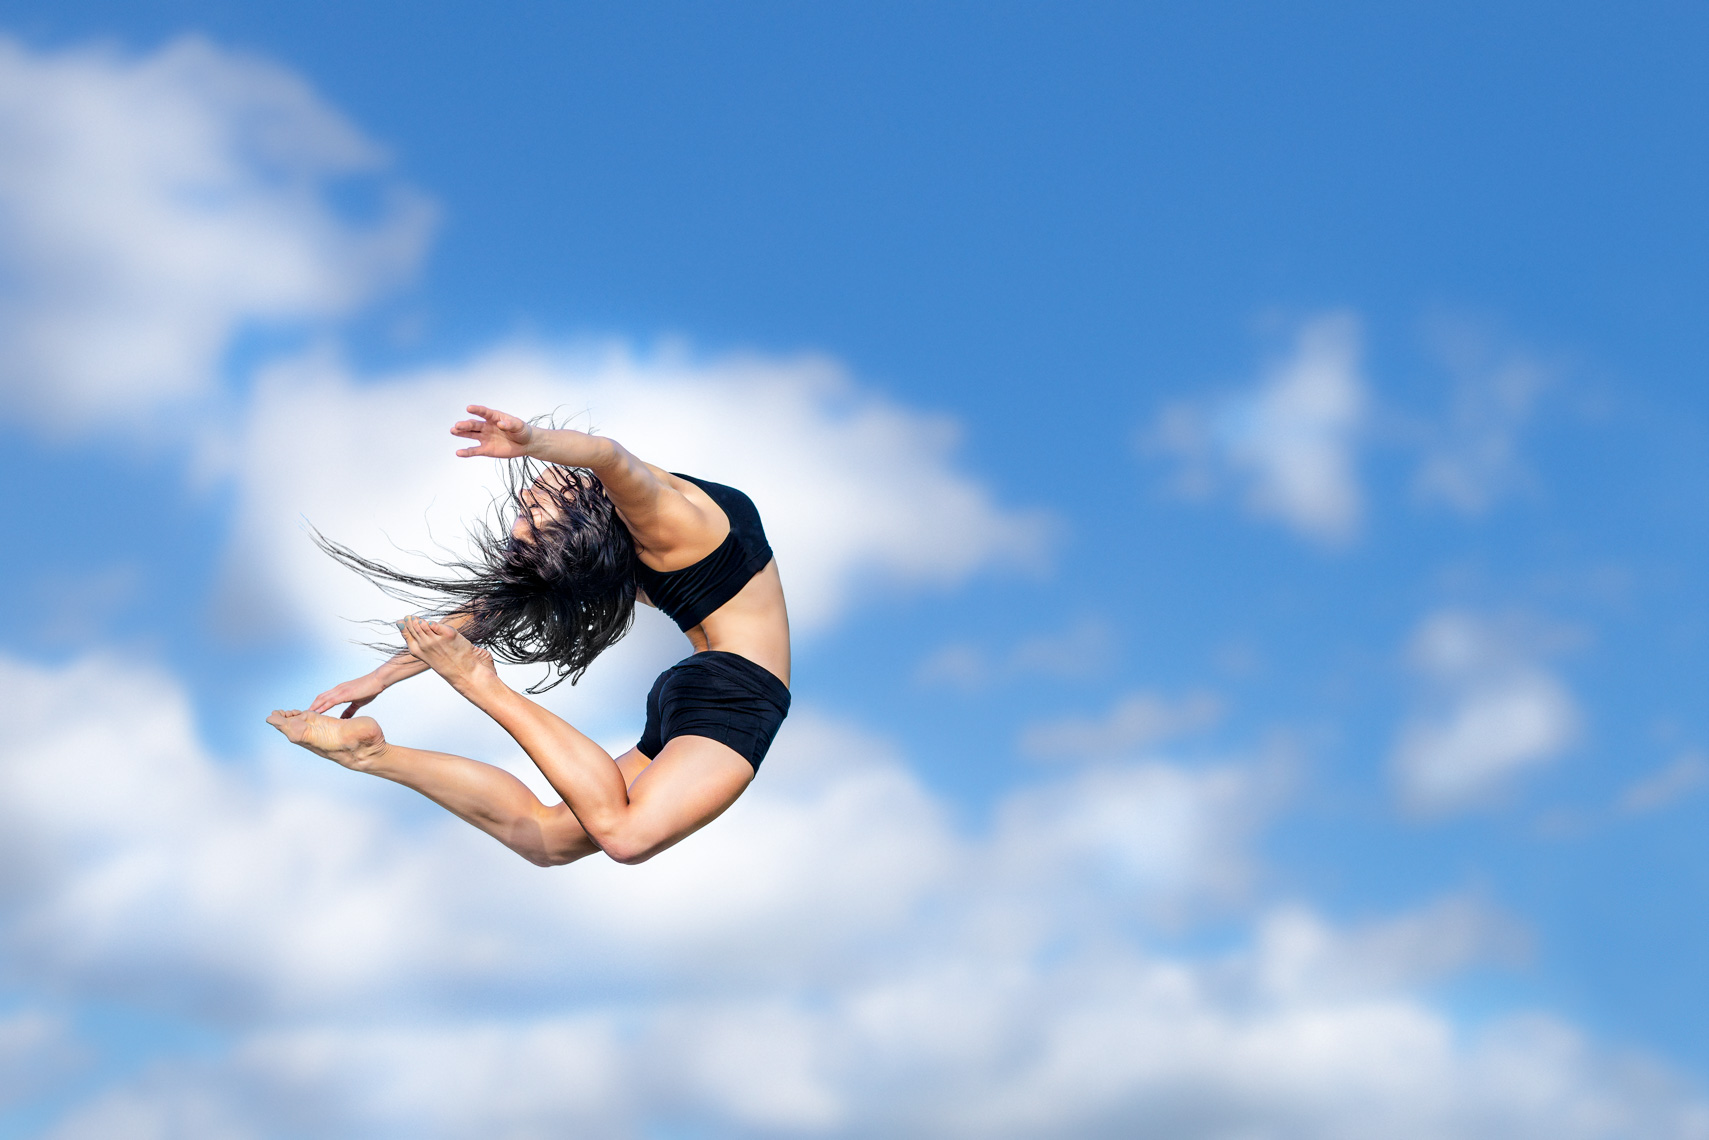 Hip hop dancer with clouds and sky  - a study of movement by San Francisco photographer  Robert Houser.